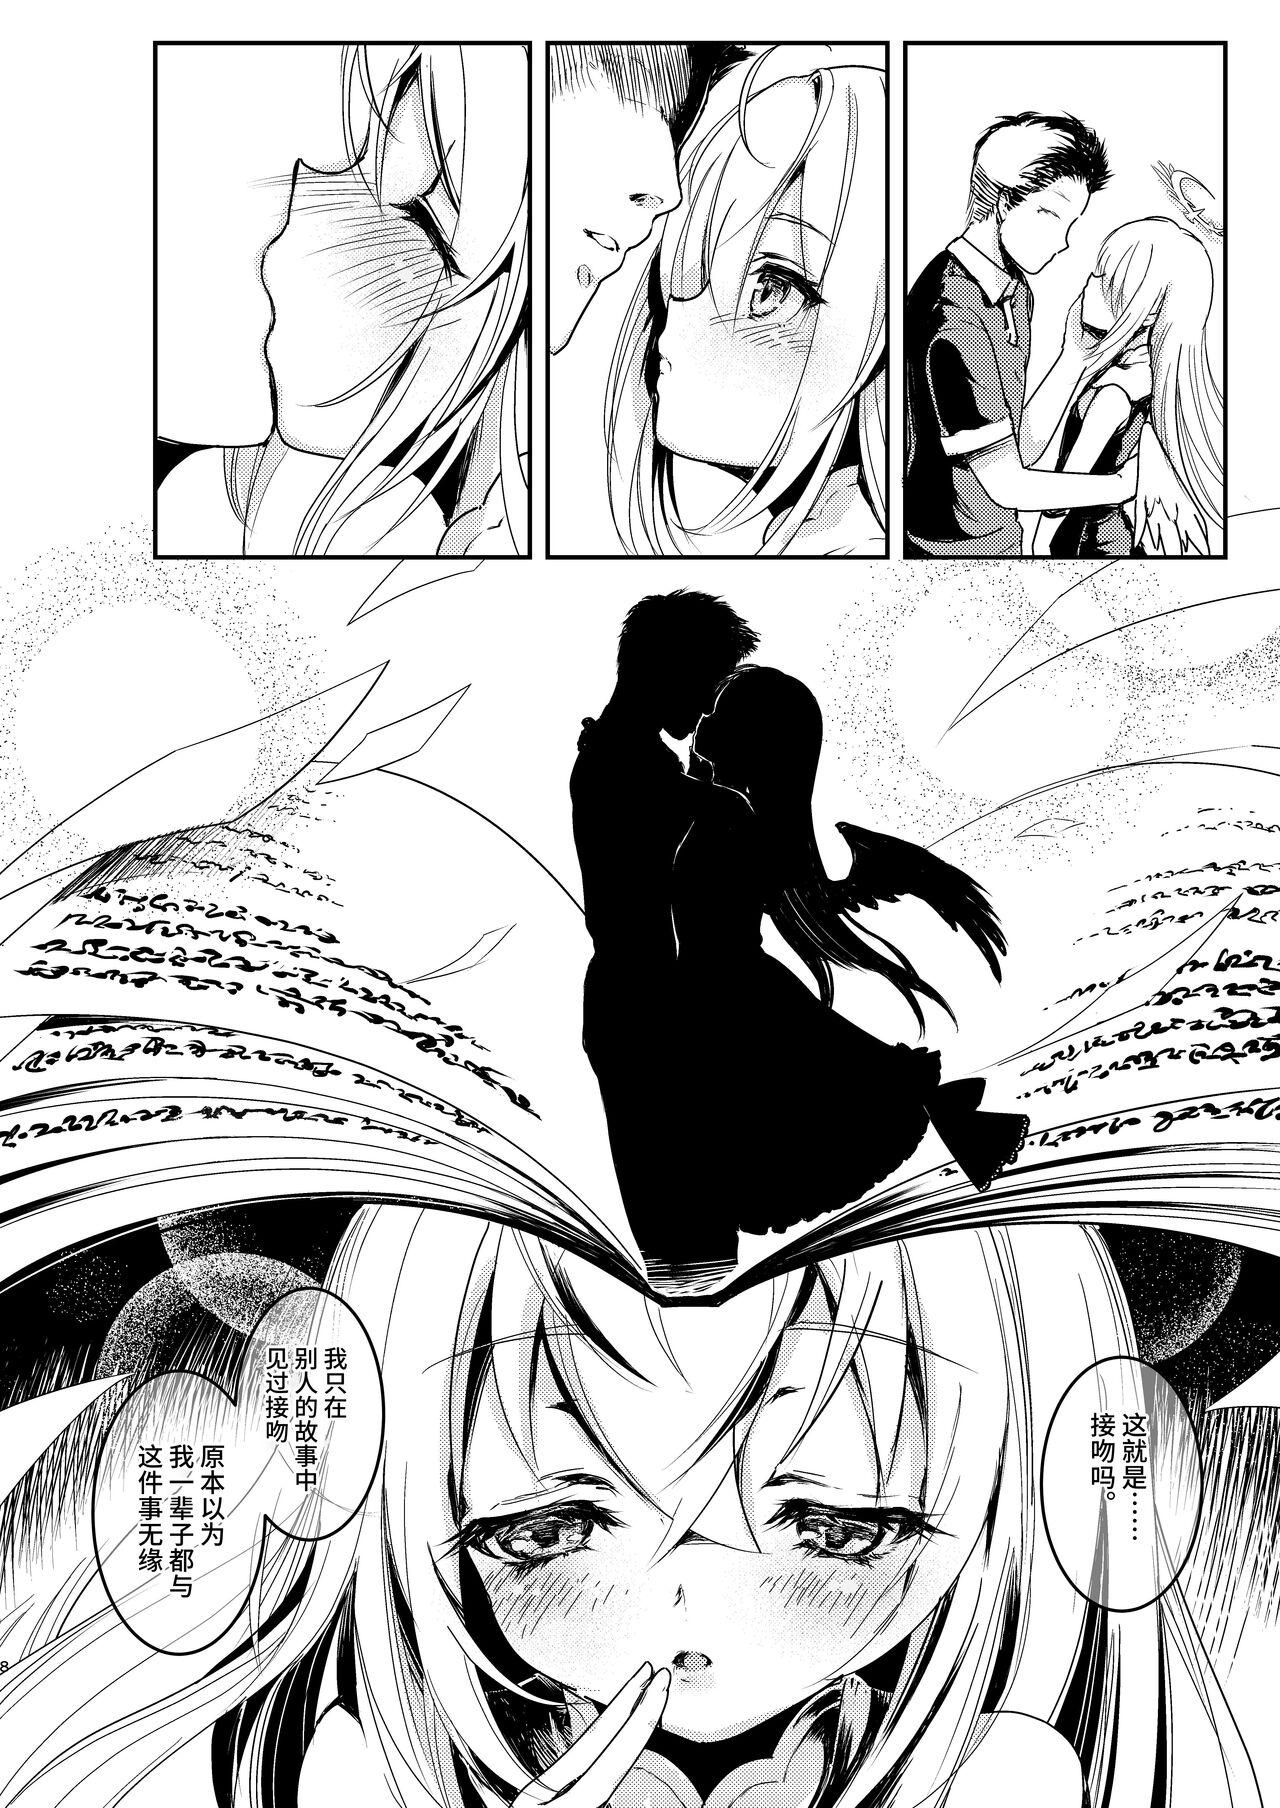 Stroking Sensei, Oshiete Hoshii. - Teacher, I would like you to tell me. | 老师、请您教教我。 - Blue archive Publico - Page 10